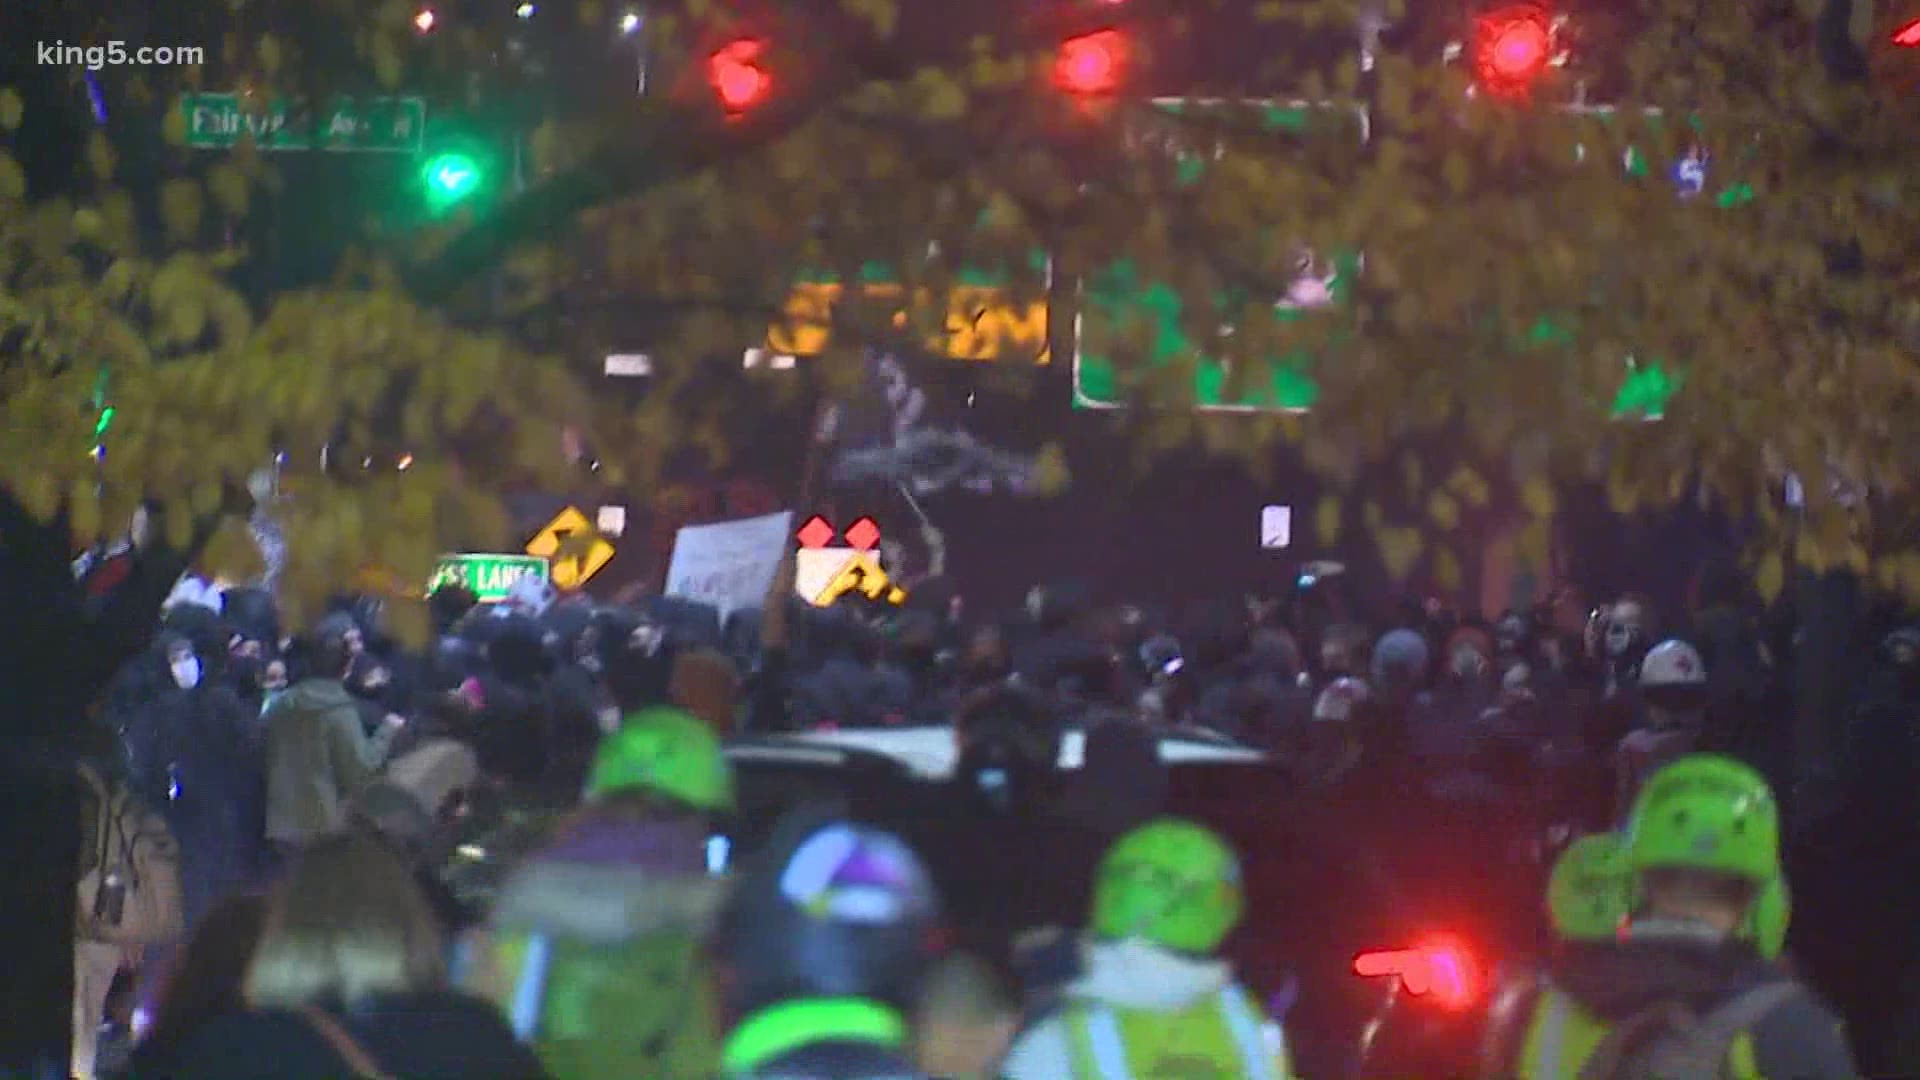 Demonstrators took over Mercer Street in downtown Seattle on Election Night, marching toward I-5 as police monitored the marches.